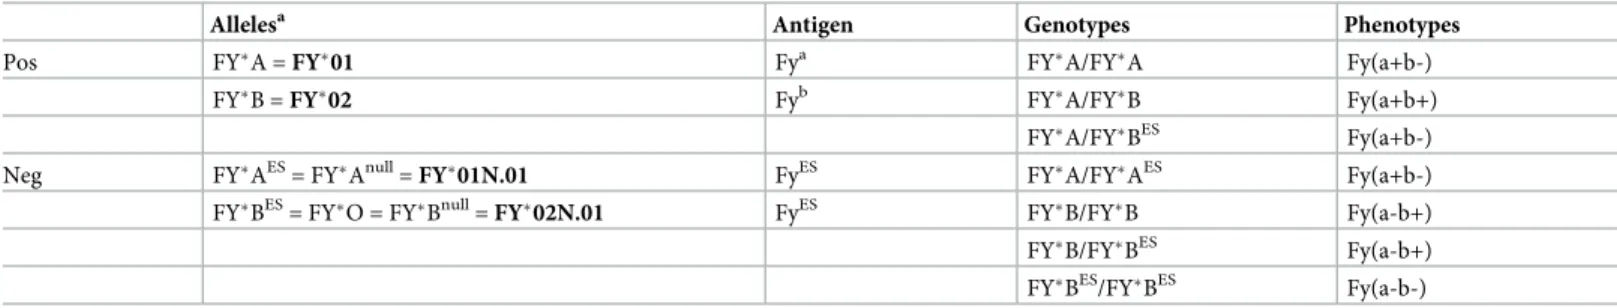 Table 1. Major Duffy alleles, genotypes and phenotypes described in human populations and alternate nomenclature.